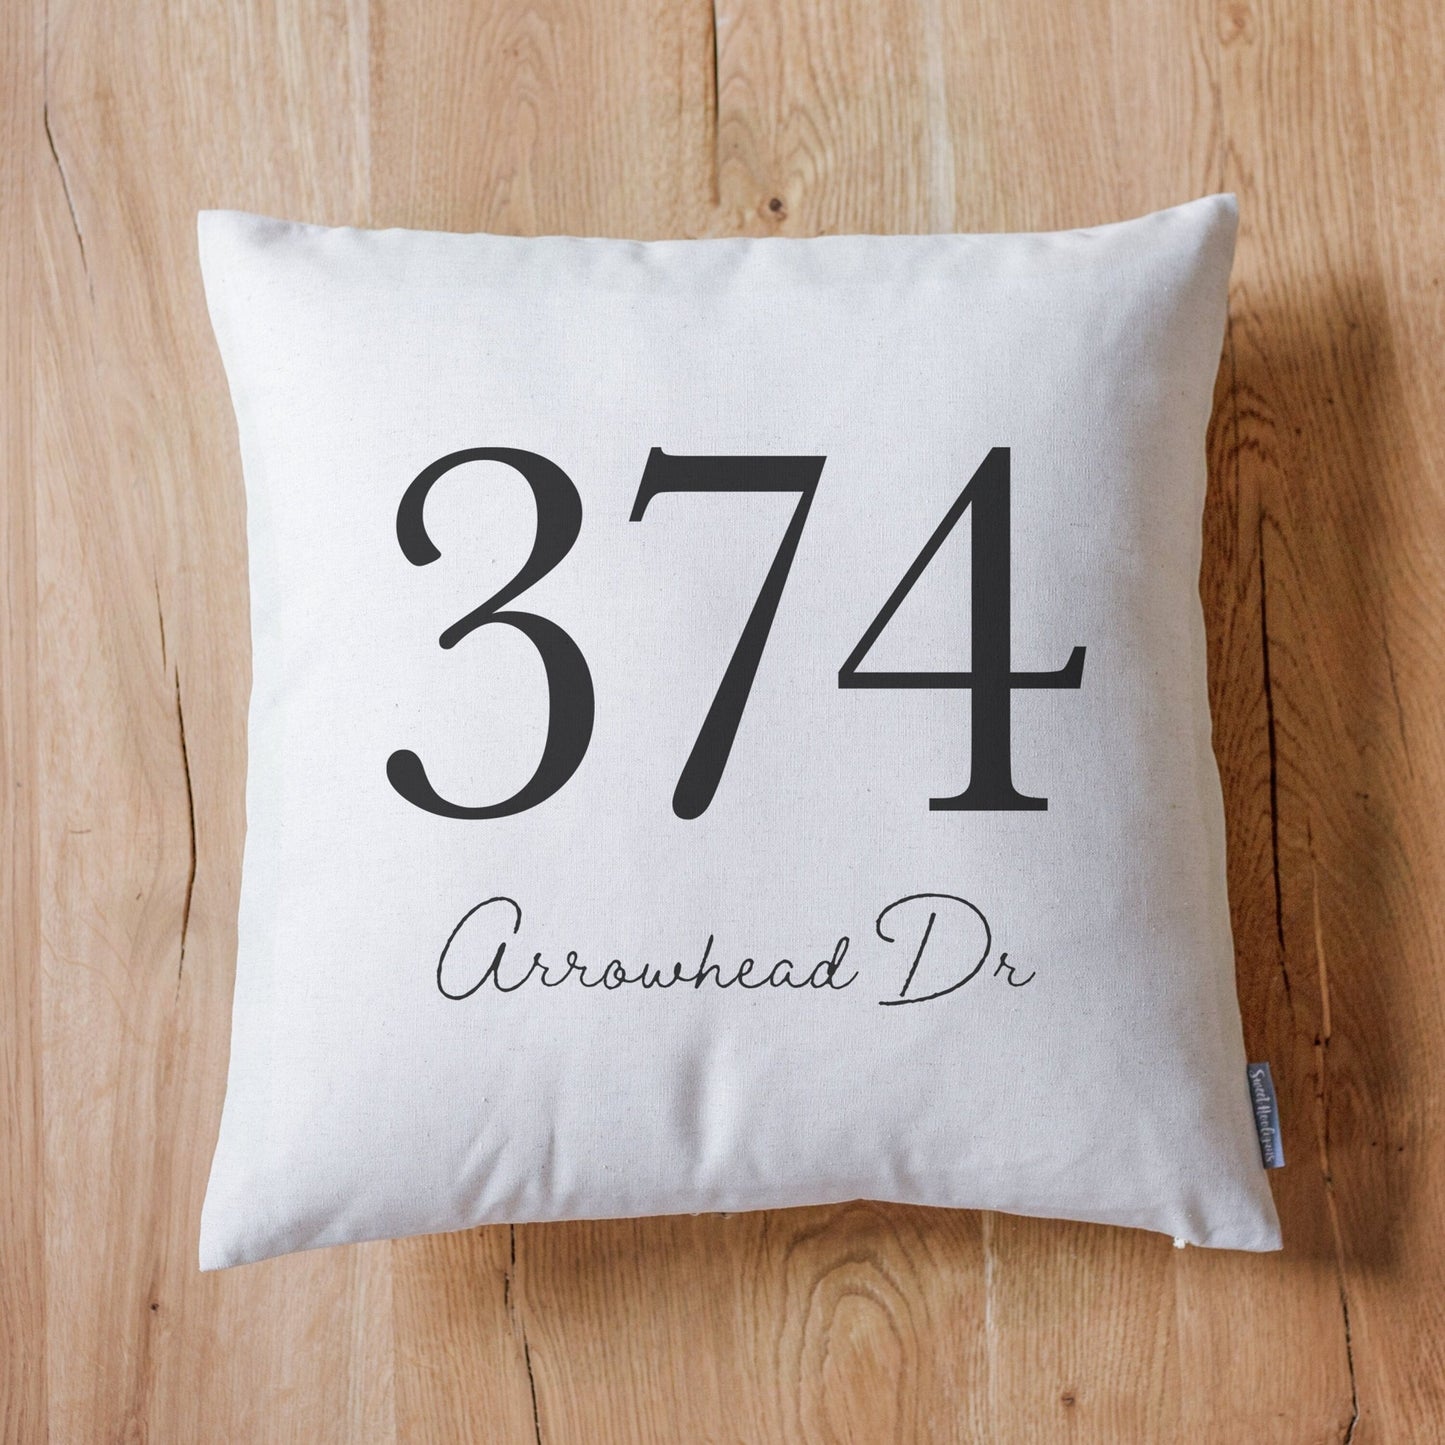 Load image into Gallery viewer, Personalized Address Pillow | Personalized BOHO Pillow | Porch Decor | Housewarming Gift | Rustic Home Decor | Home Decor | Farmhouse Decor
